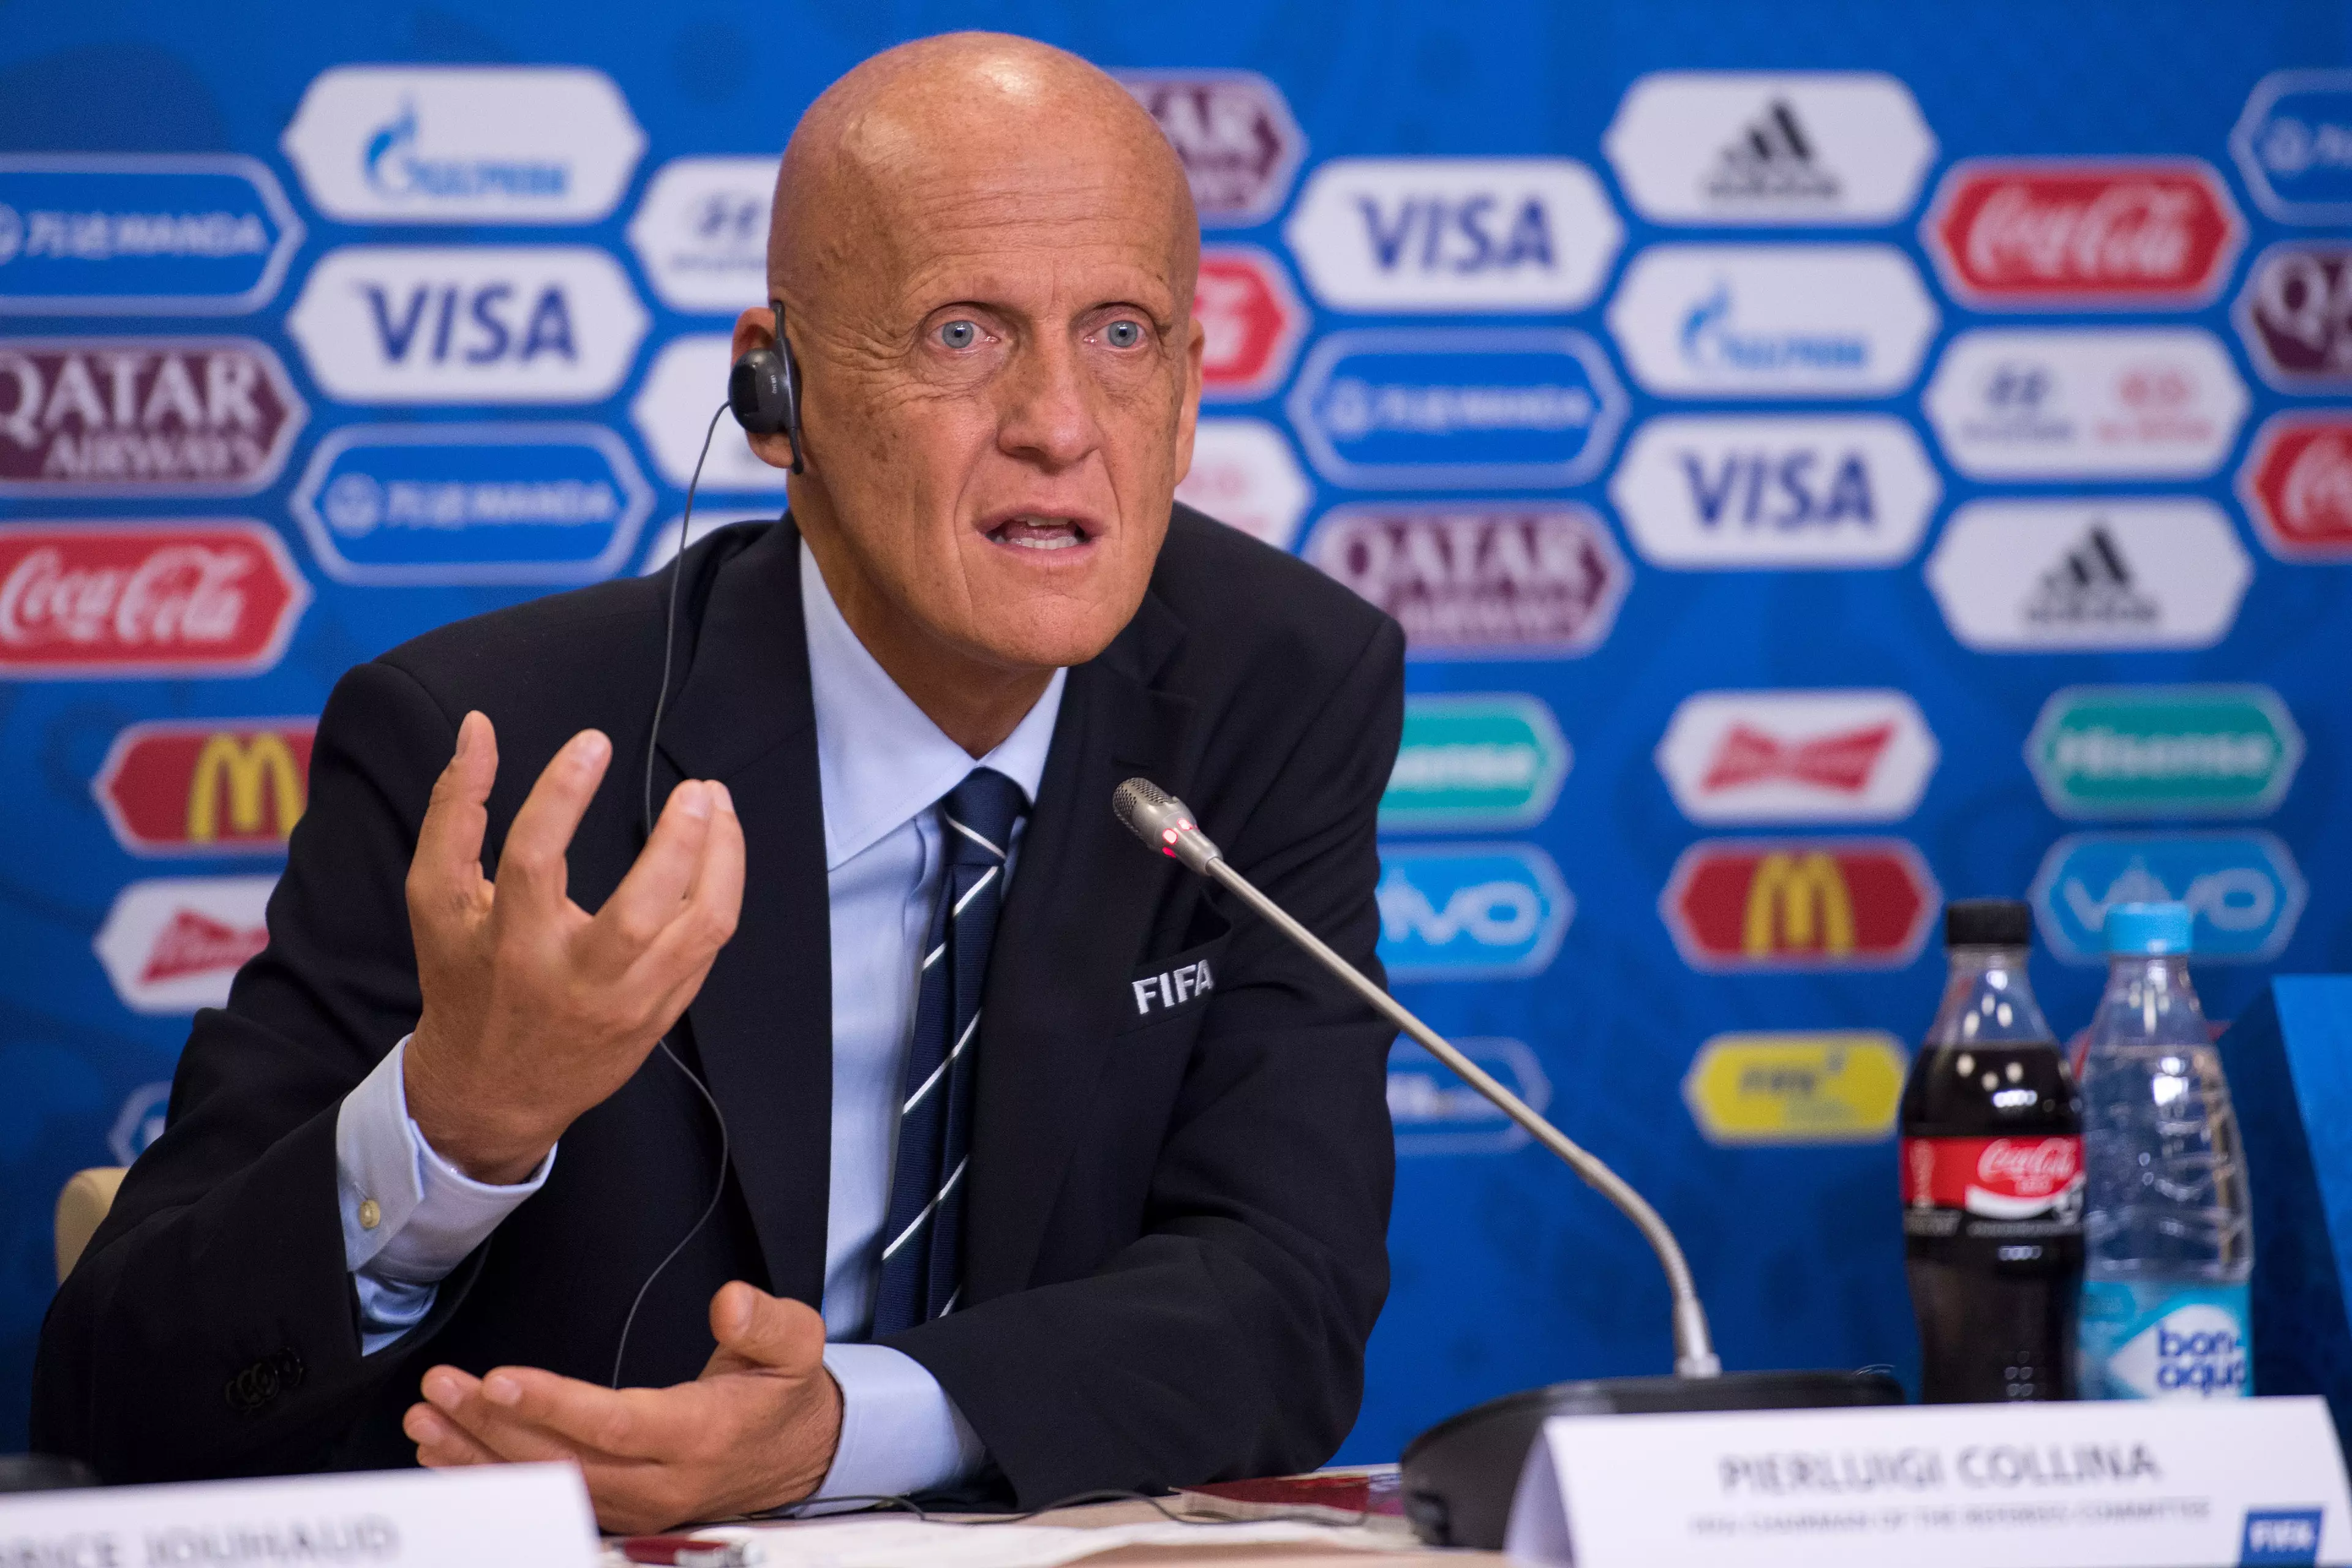 Collina wasn't a fan of VAR. Image: PA Images